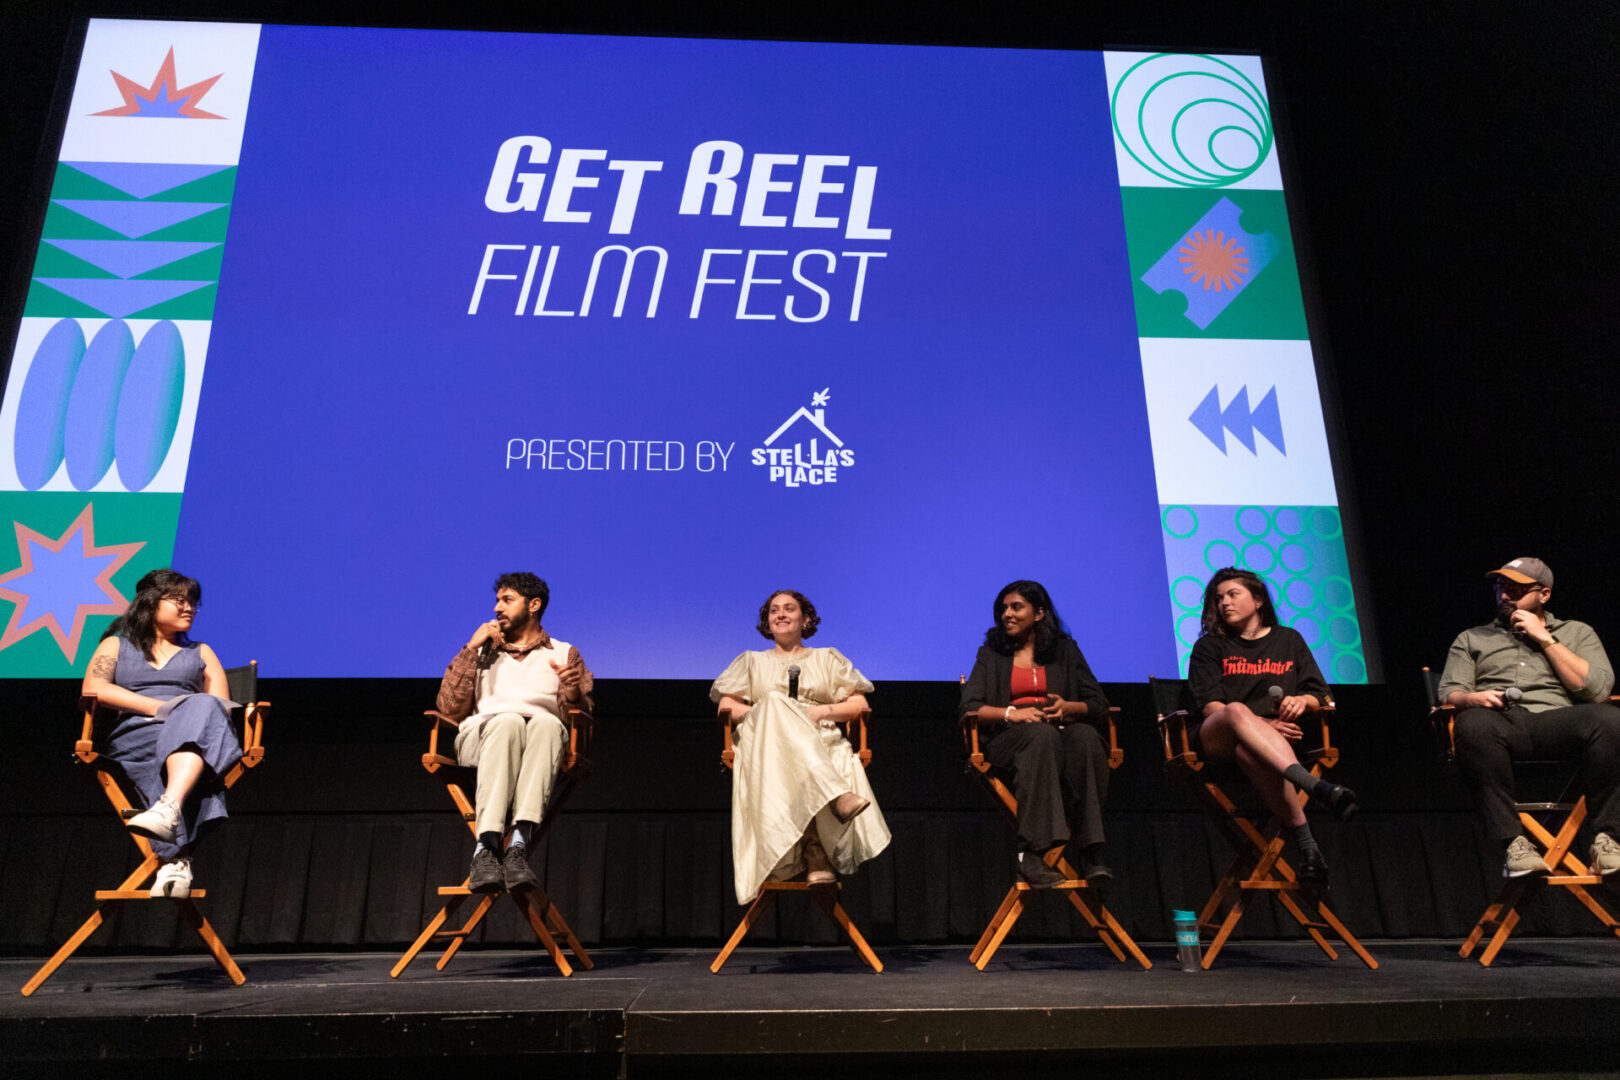 A group of filmmakers sit in director chairs in front of a blue cinema screen that says 'Get Reel Film Fest' brought to you by Stella's Place.